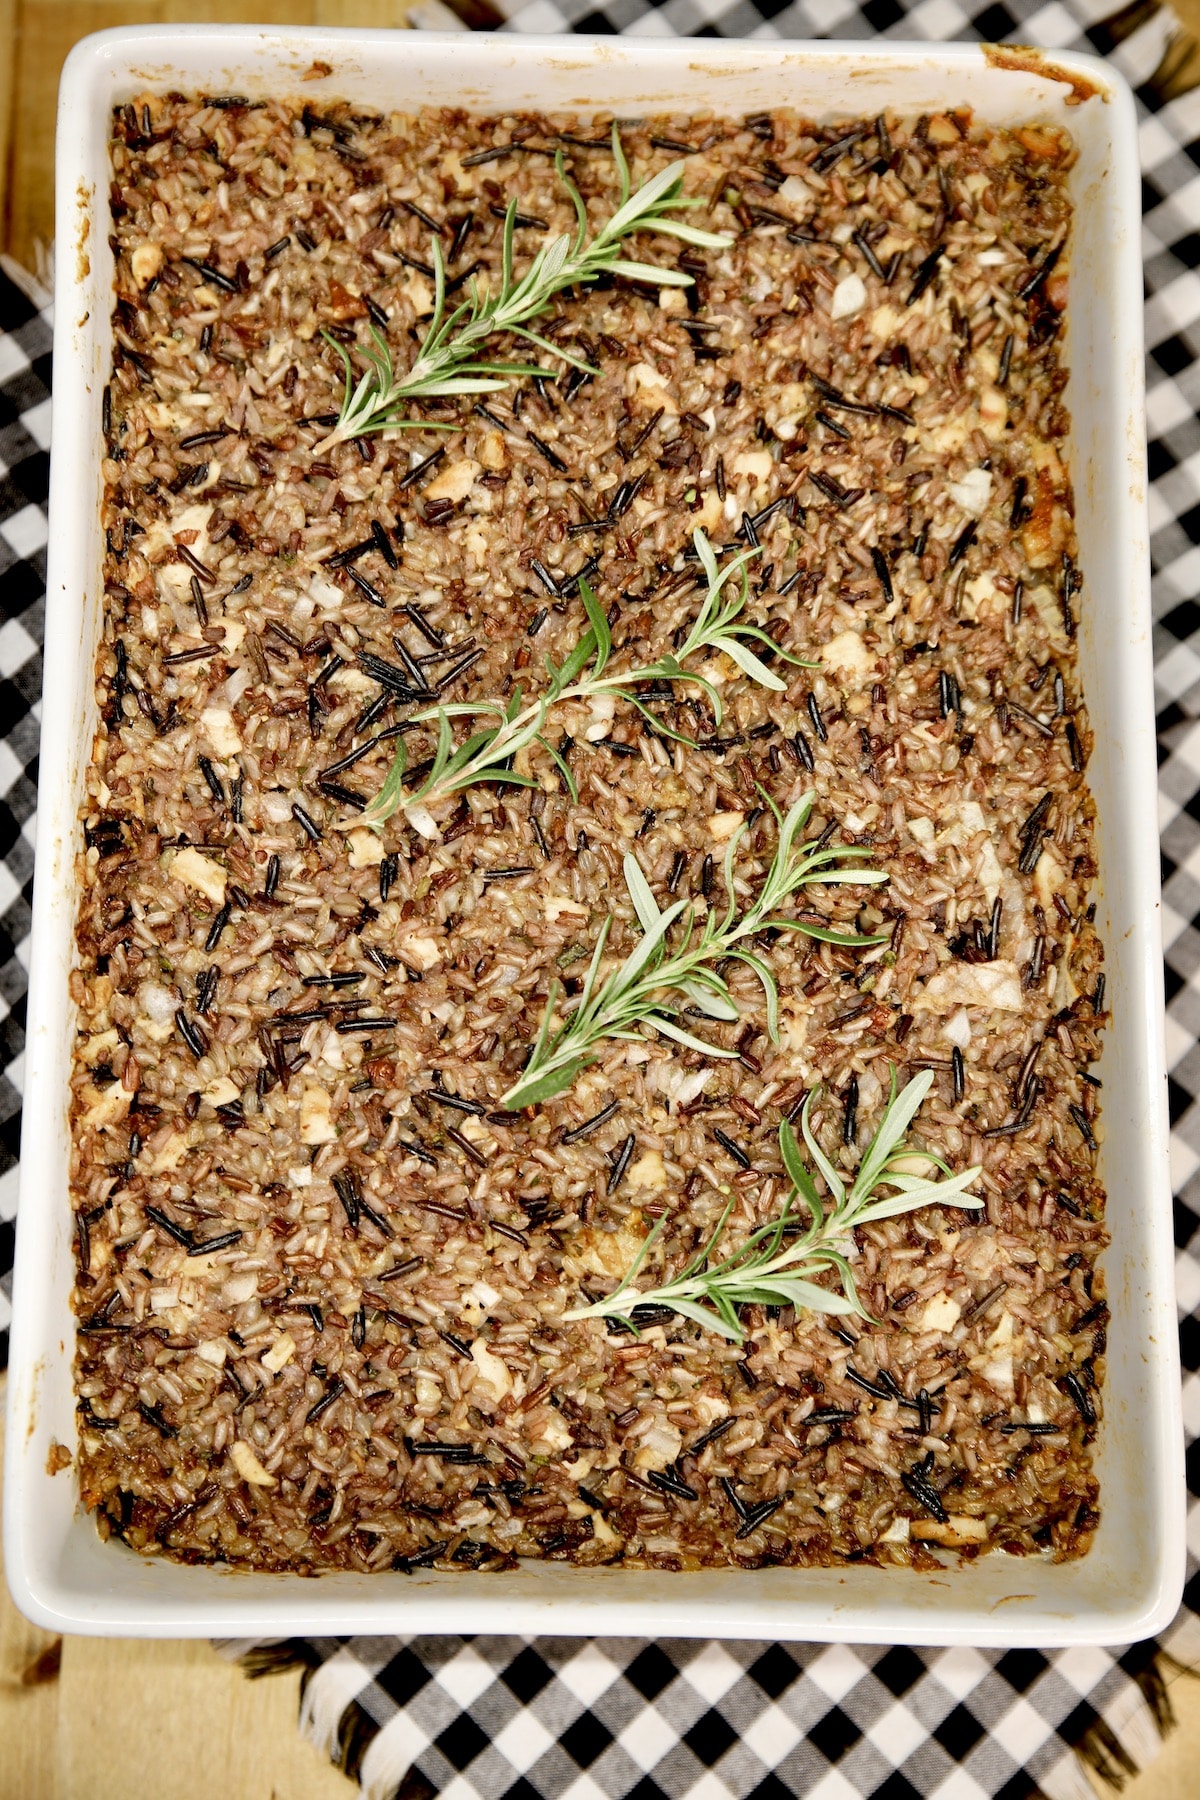 Pan of baked wild rice and cornbread stuffing.